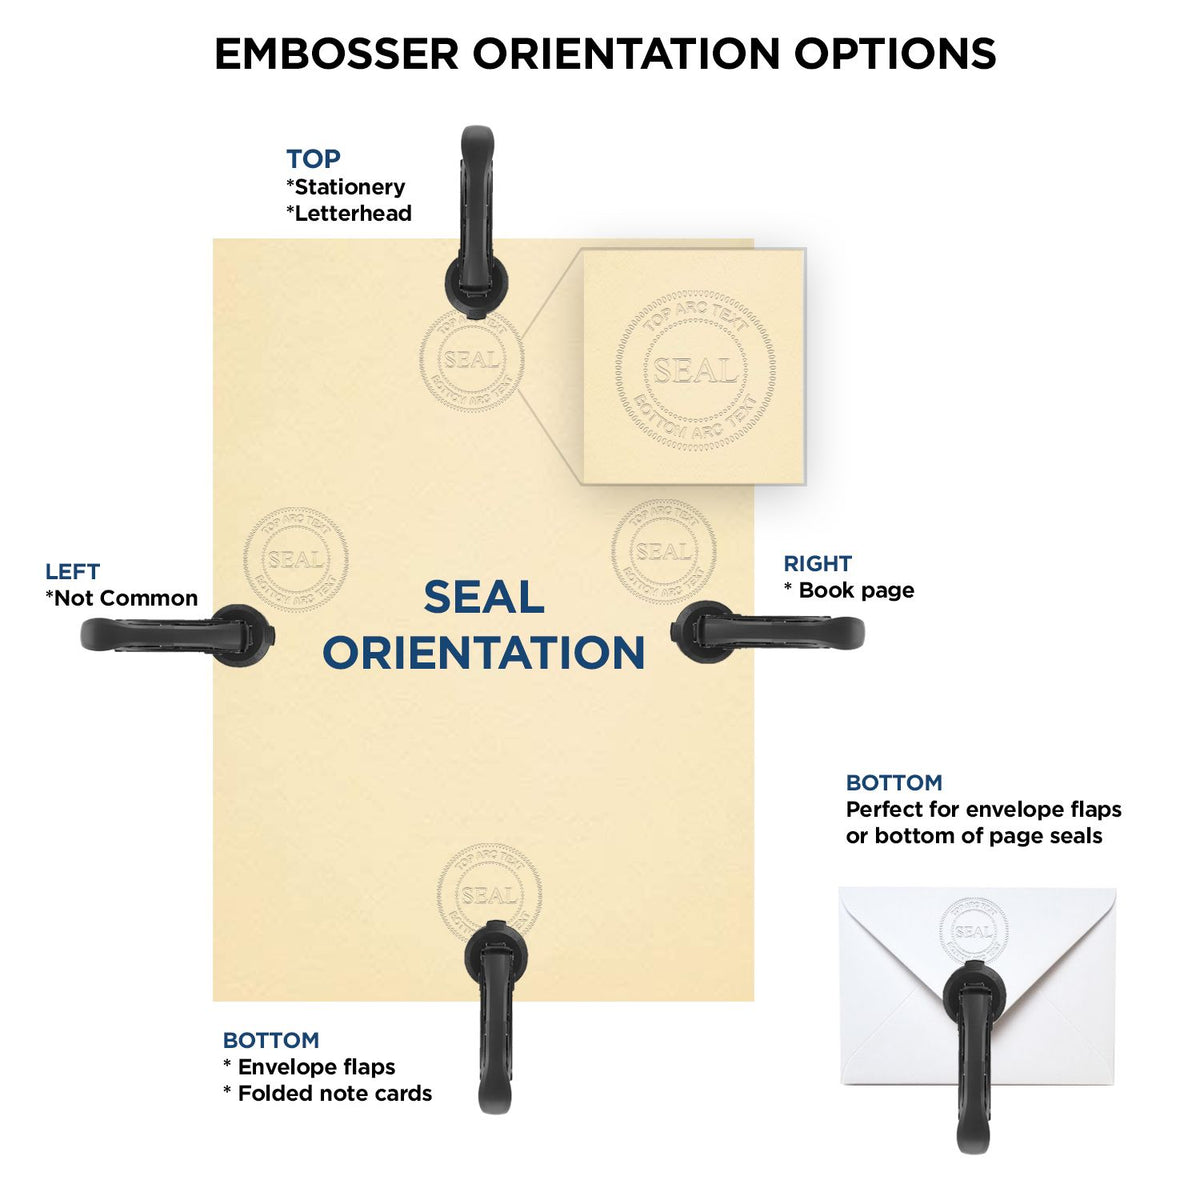 An infographic for the State of Connecticut Architectural Seal Embosser showing embosser orientation, this is showing examples of a top, bottom, right and left insert.